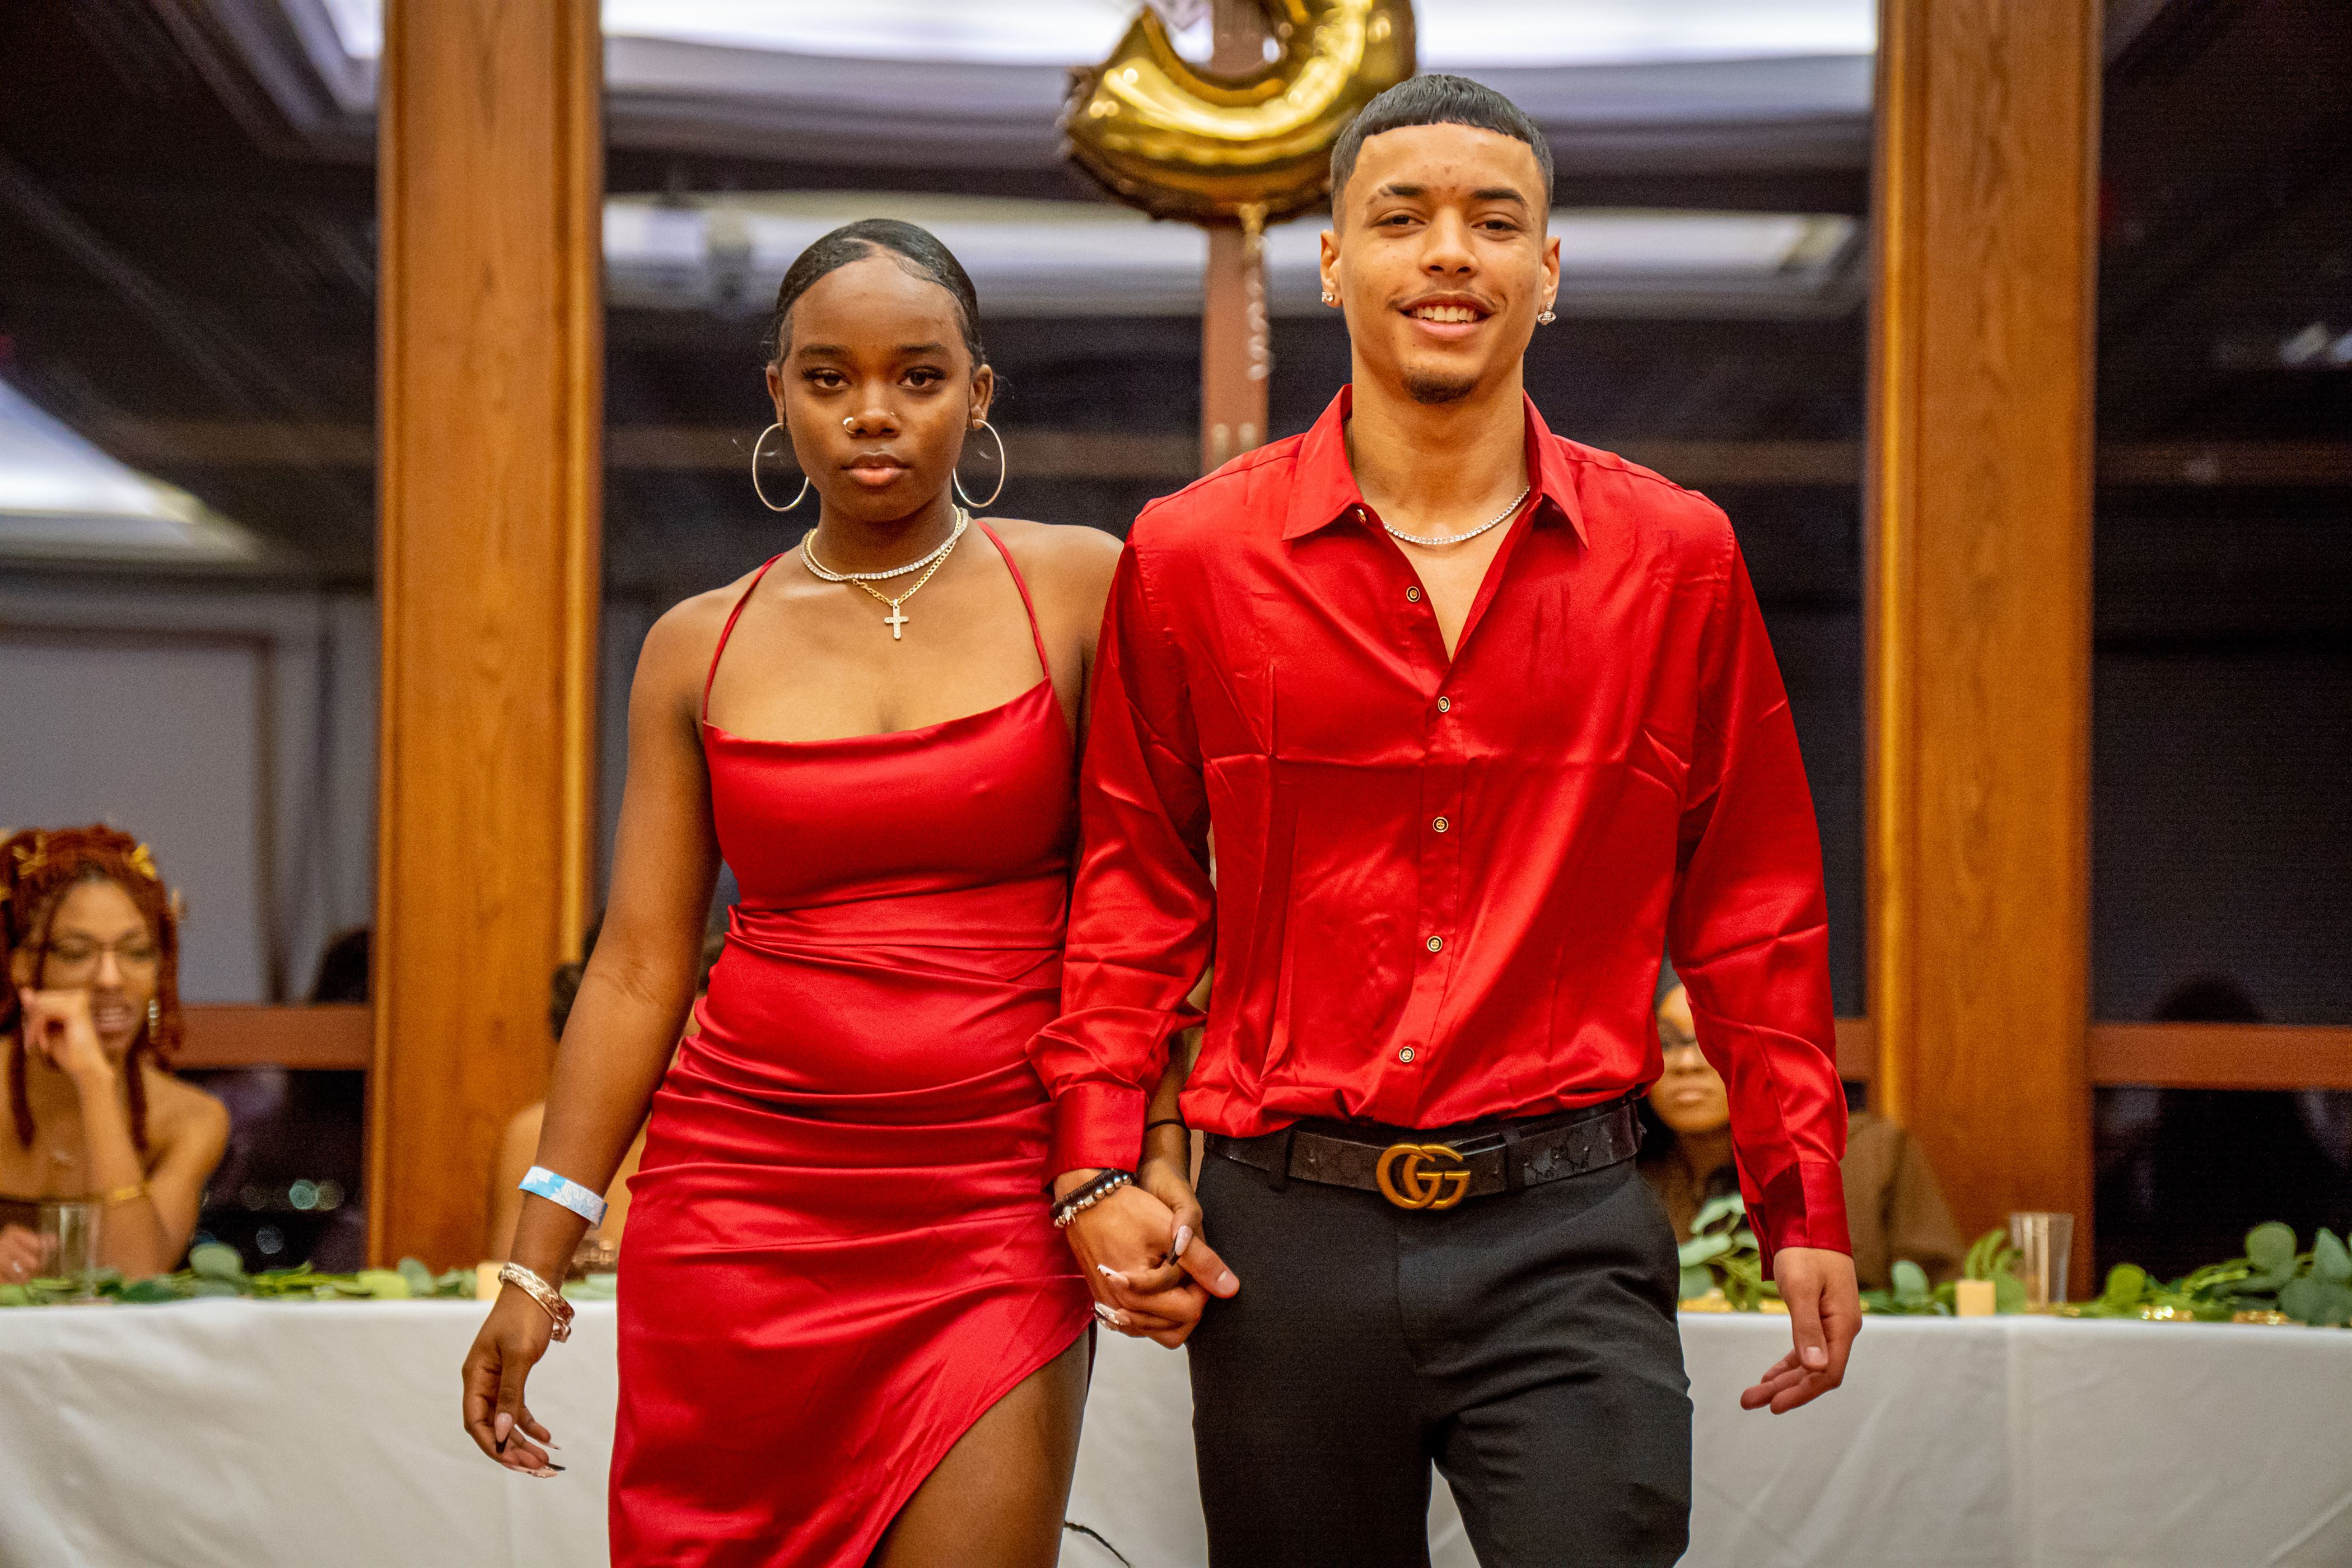 A couple competes in the best-dressed competition at the Harvest Ball. 
Lynise Olivacce | The Montclarion